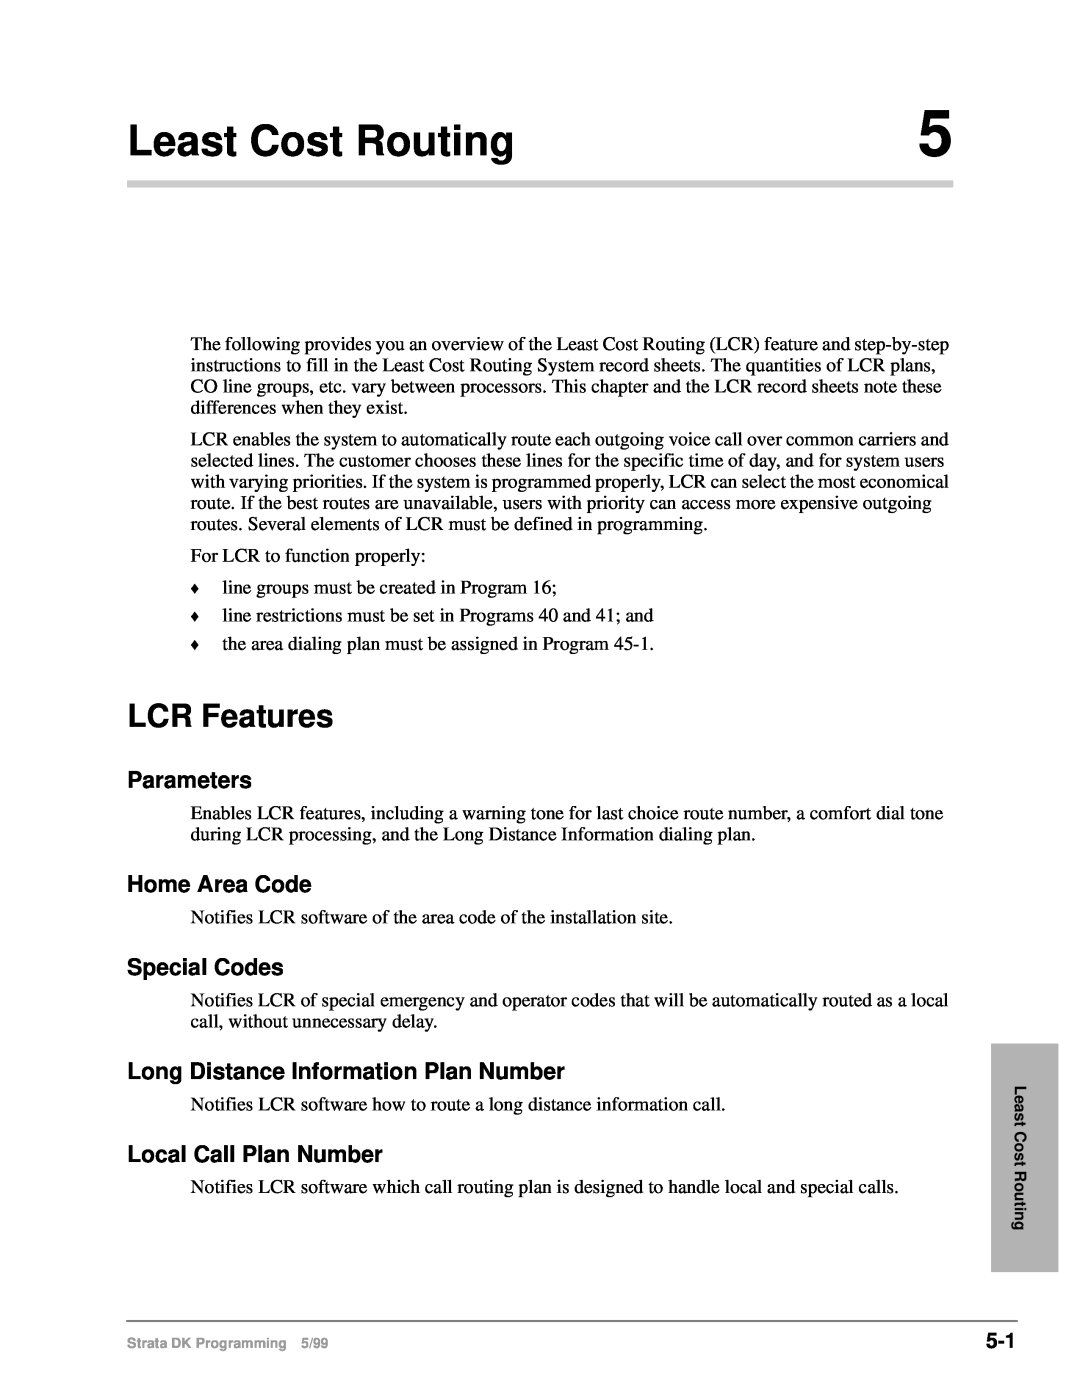 Toshiba dk14 manual Least Cost Routing, LCR Features, Parameters, Home Area Code, Special Codes, Local Call Plan Number 